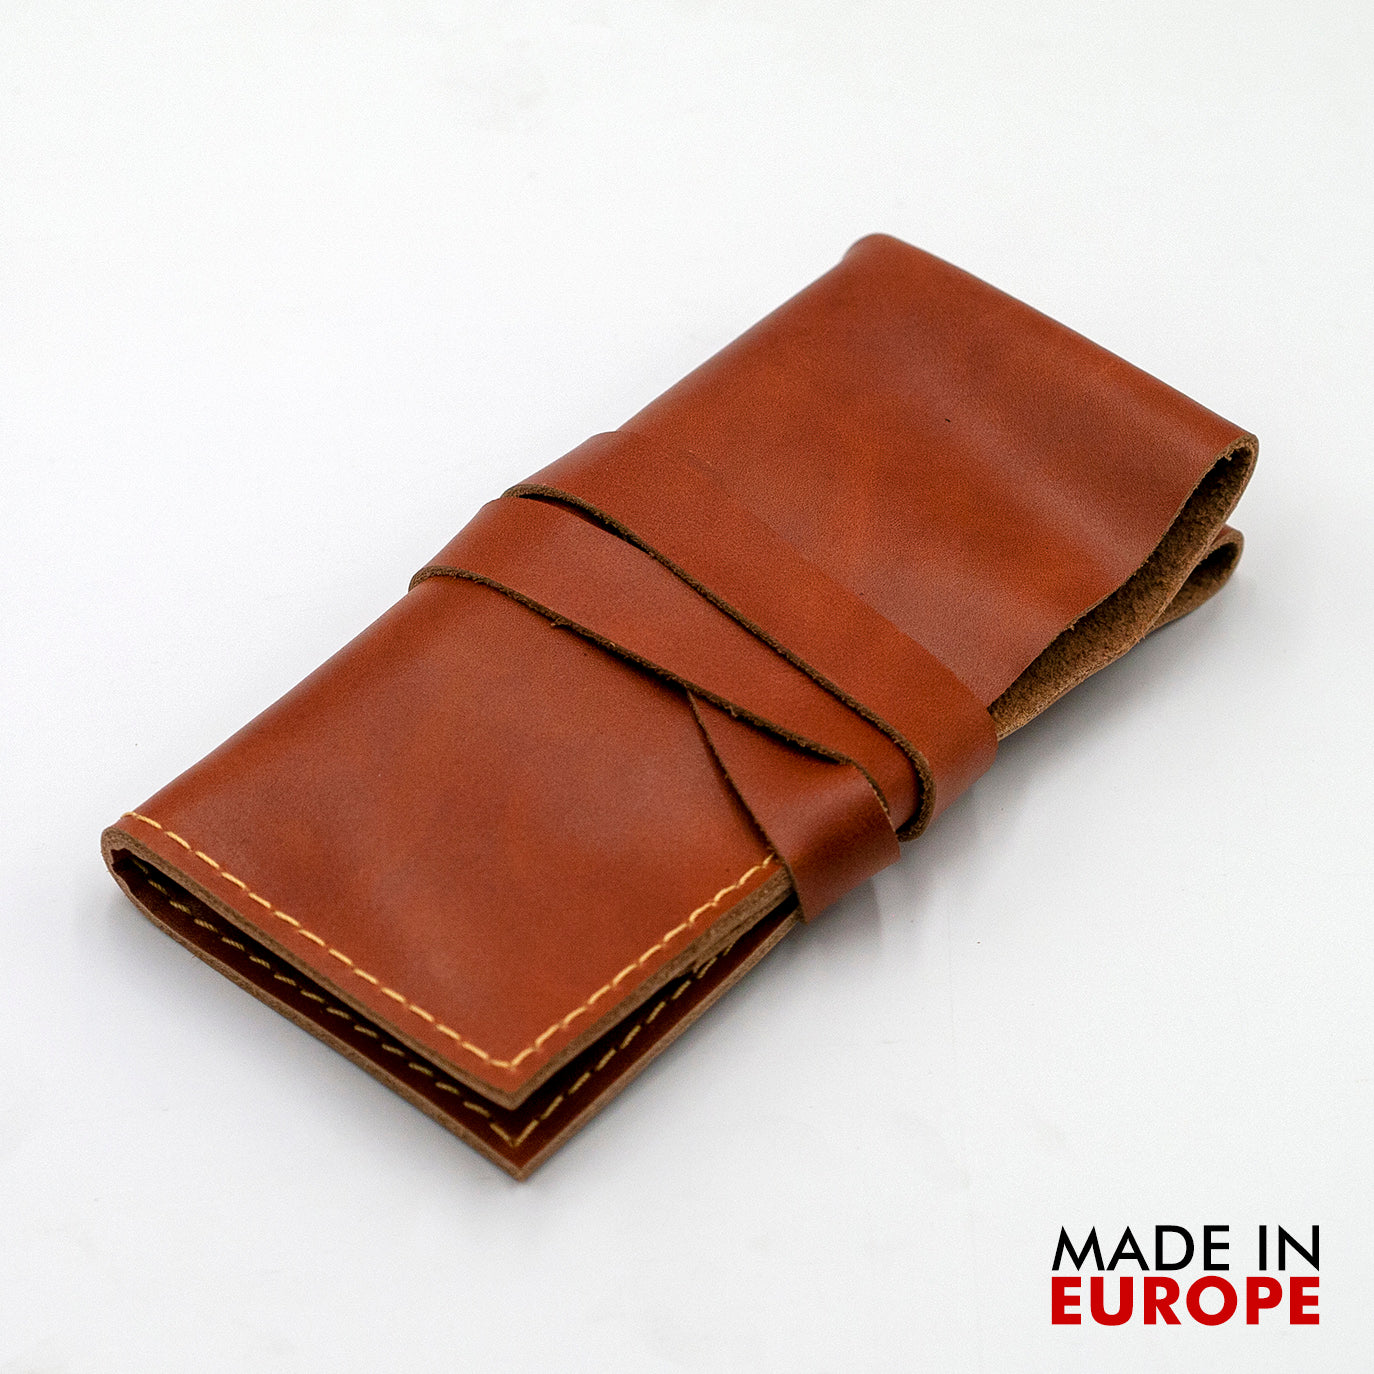 vario caramel brown leather 2 pocket watch roll